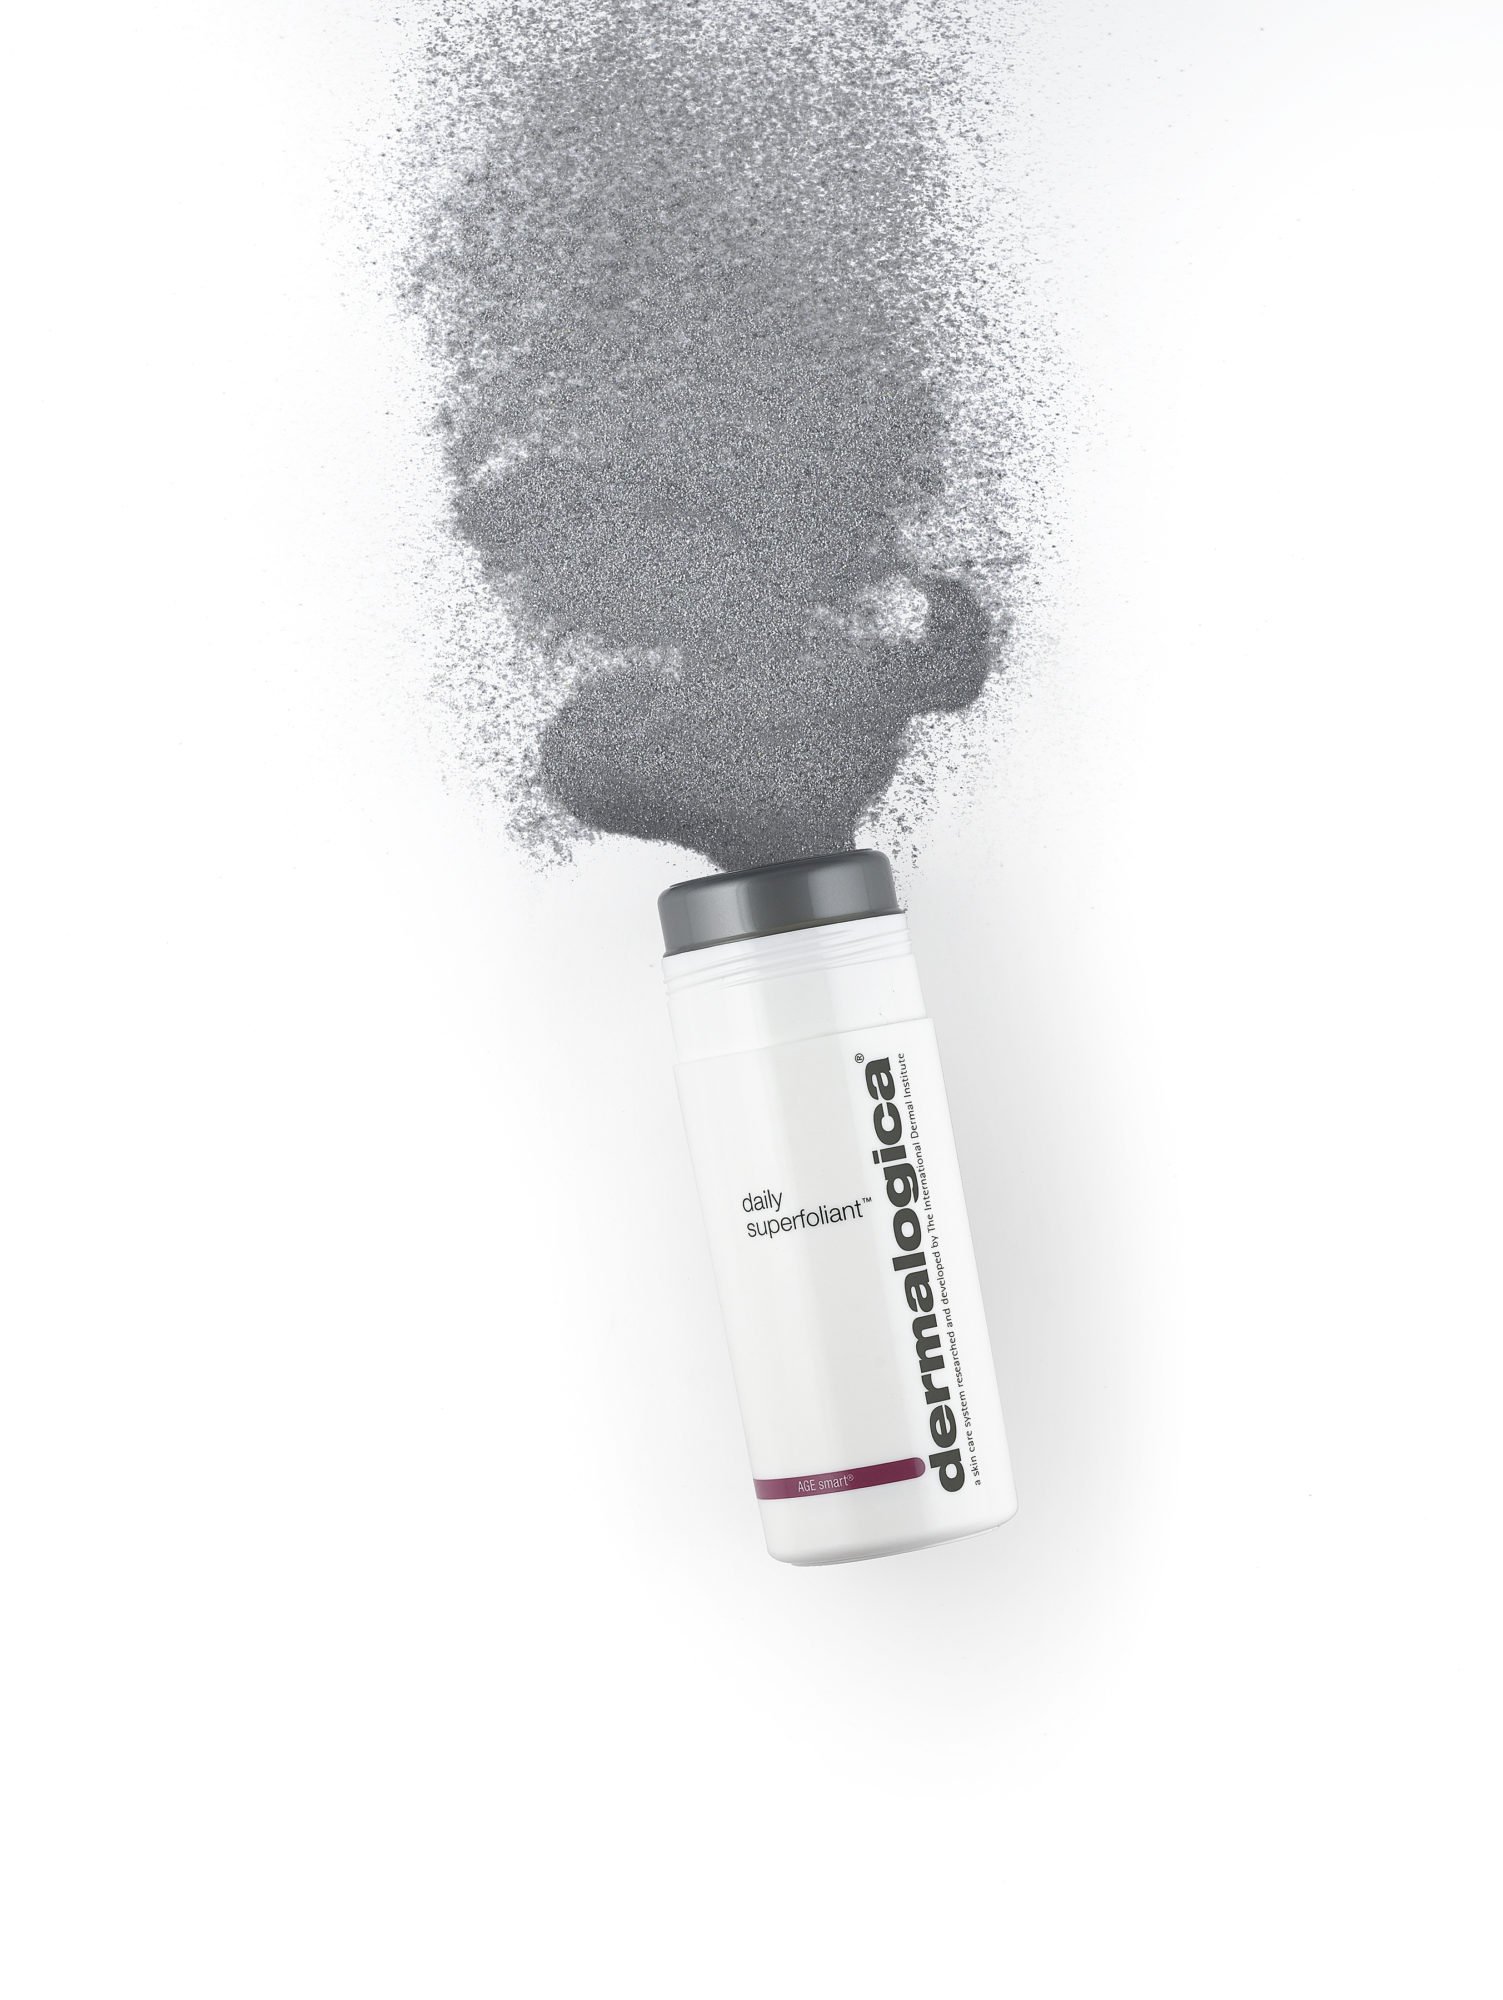 The Next Big Thing: Dermalogica Daily Superfoliant